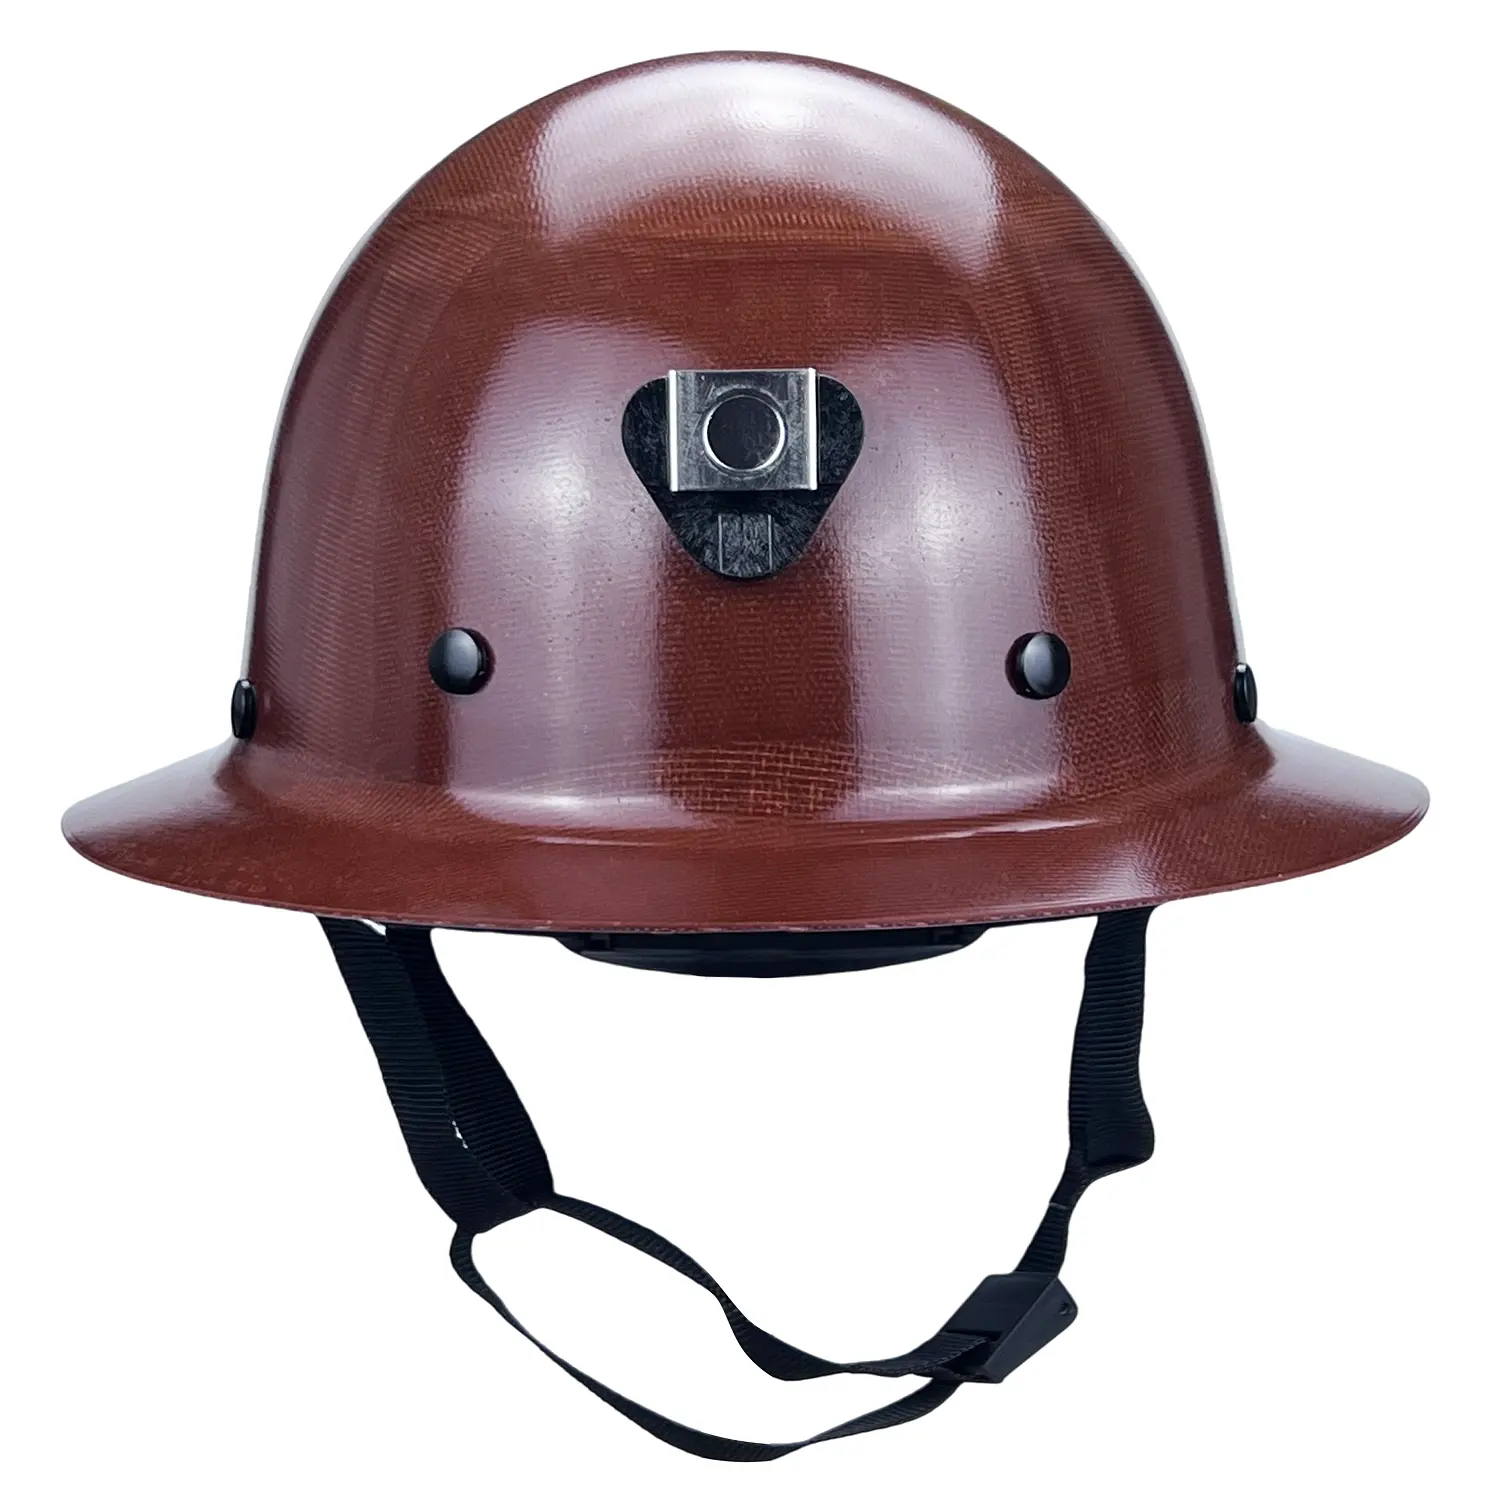 Protection Security Construction ansi type class C & G & E Hard Hat Industrial Safety Helmet